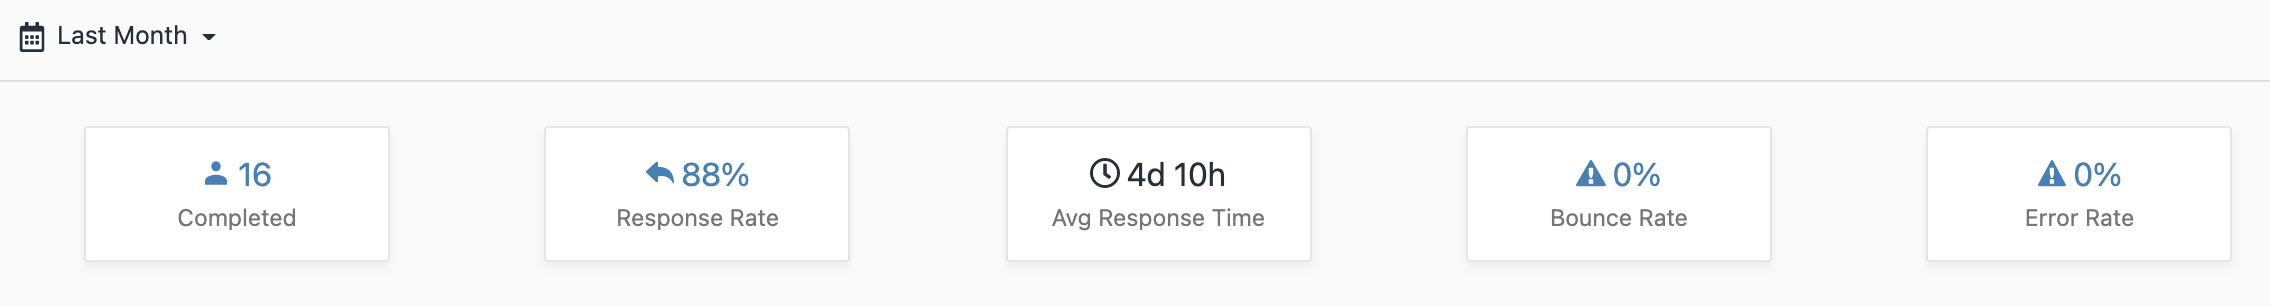 Email Sequence reporting metrics.